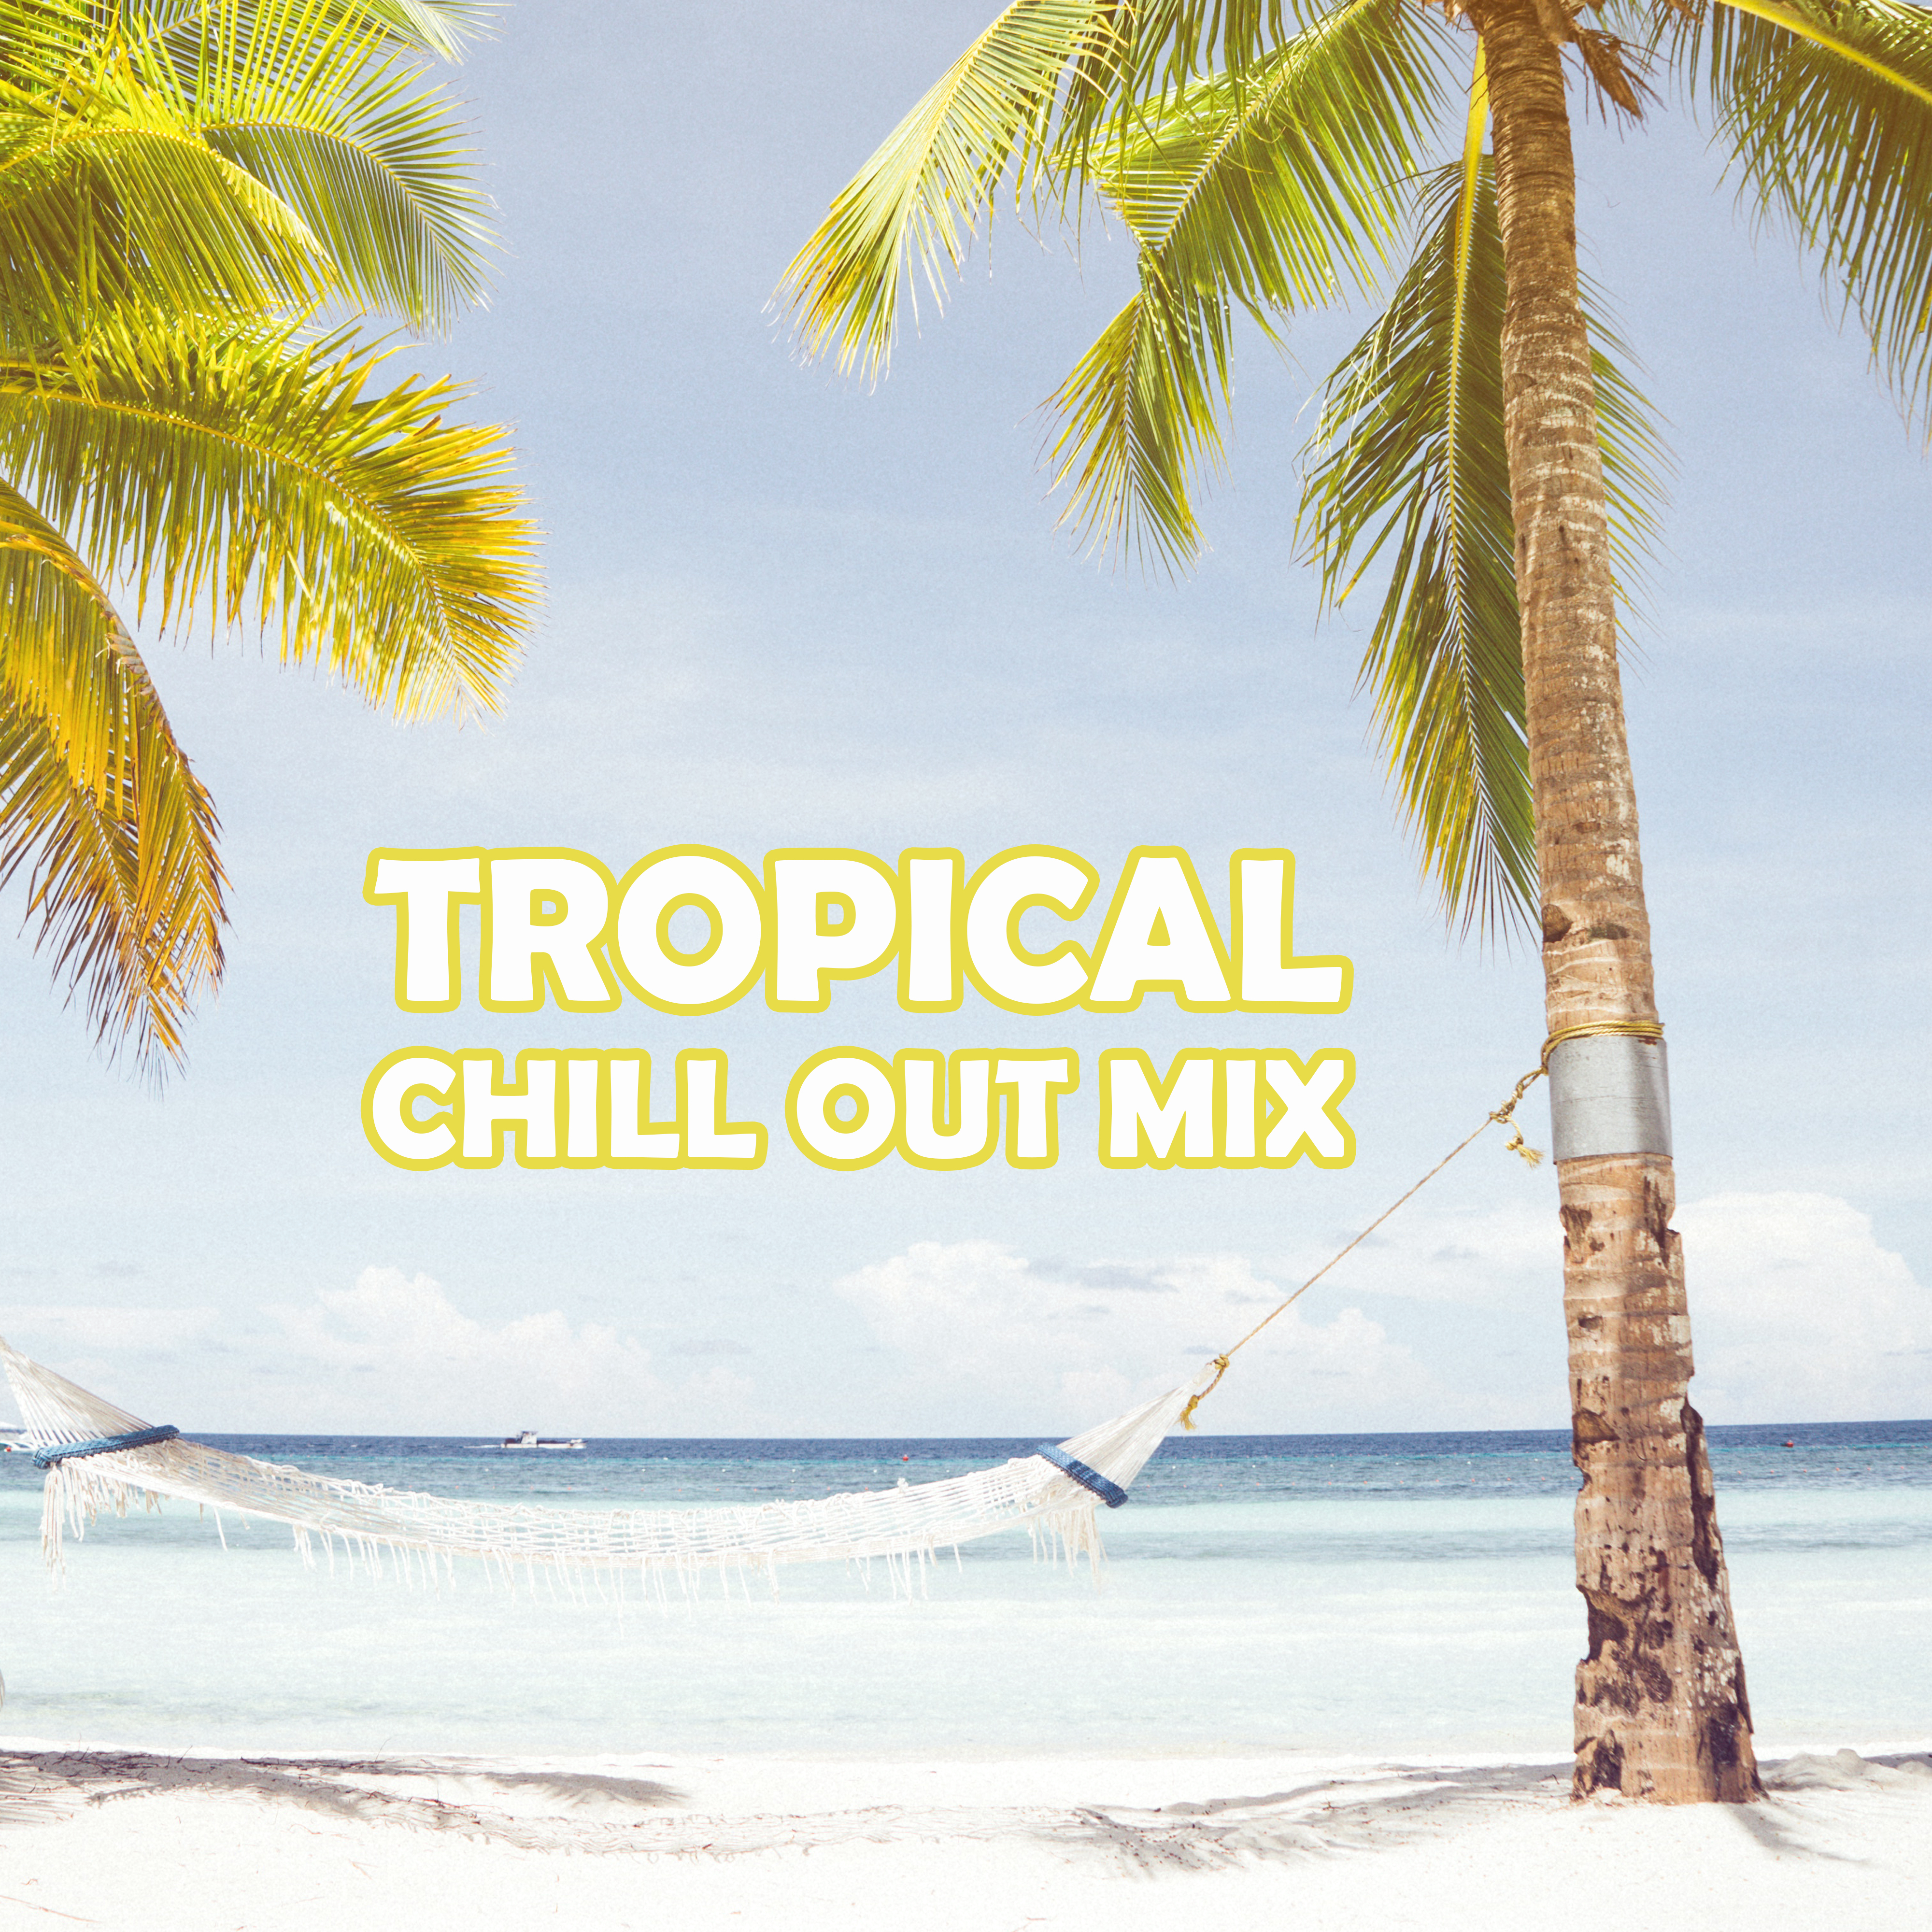 Tropical Chill Out Mix – Chill Out 2017, Party Music, Tropical Island, Hot Summer Vibes